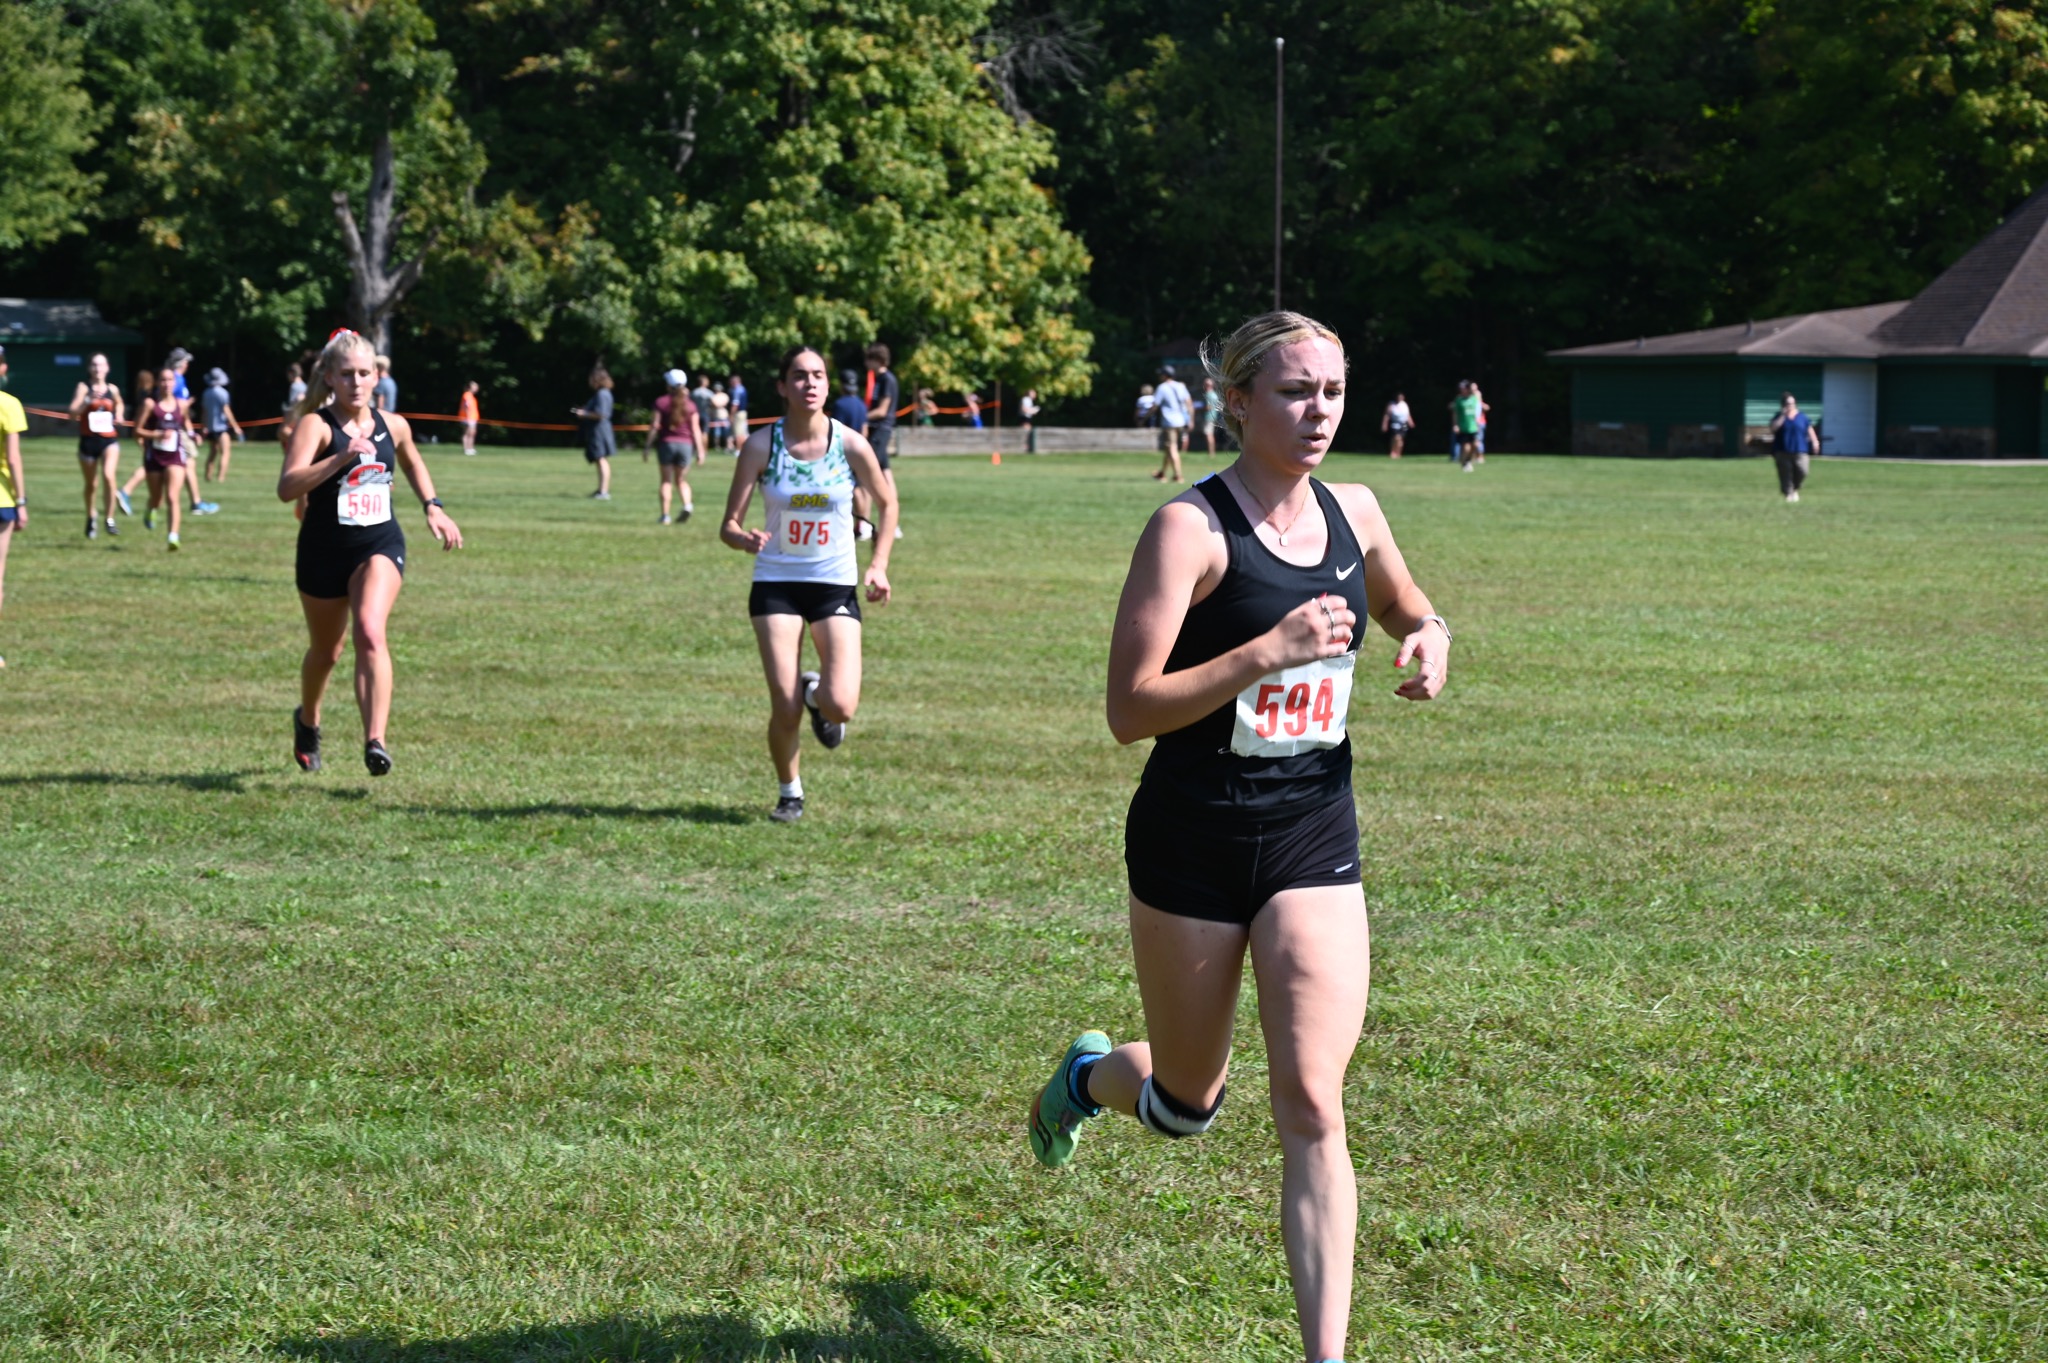 Women's Cross Country runs on Saturday at the NAIA Great Lakes Challenge